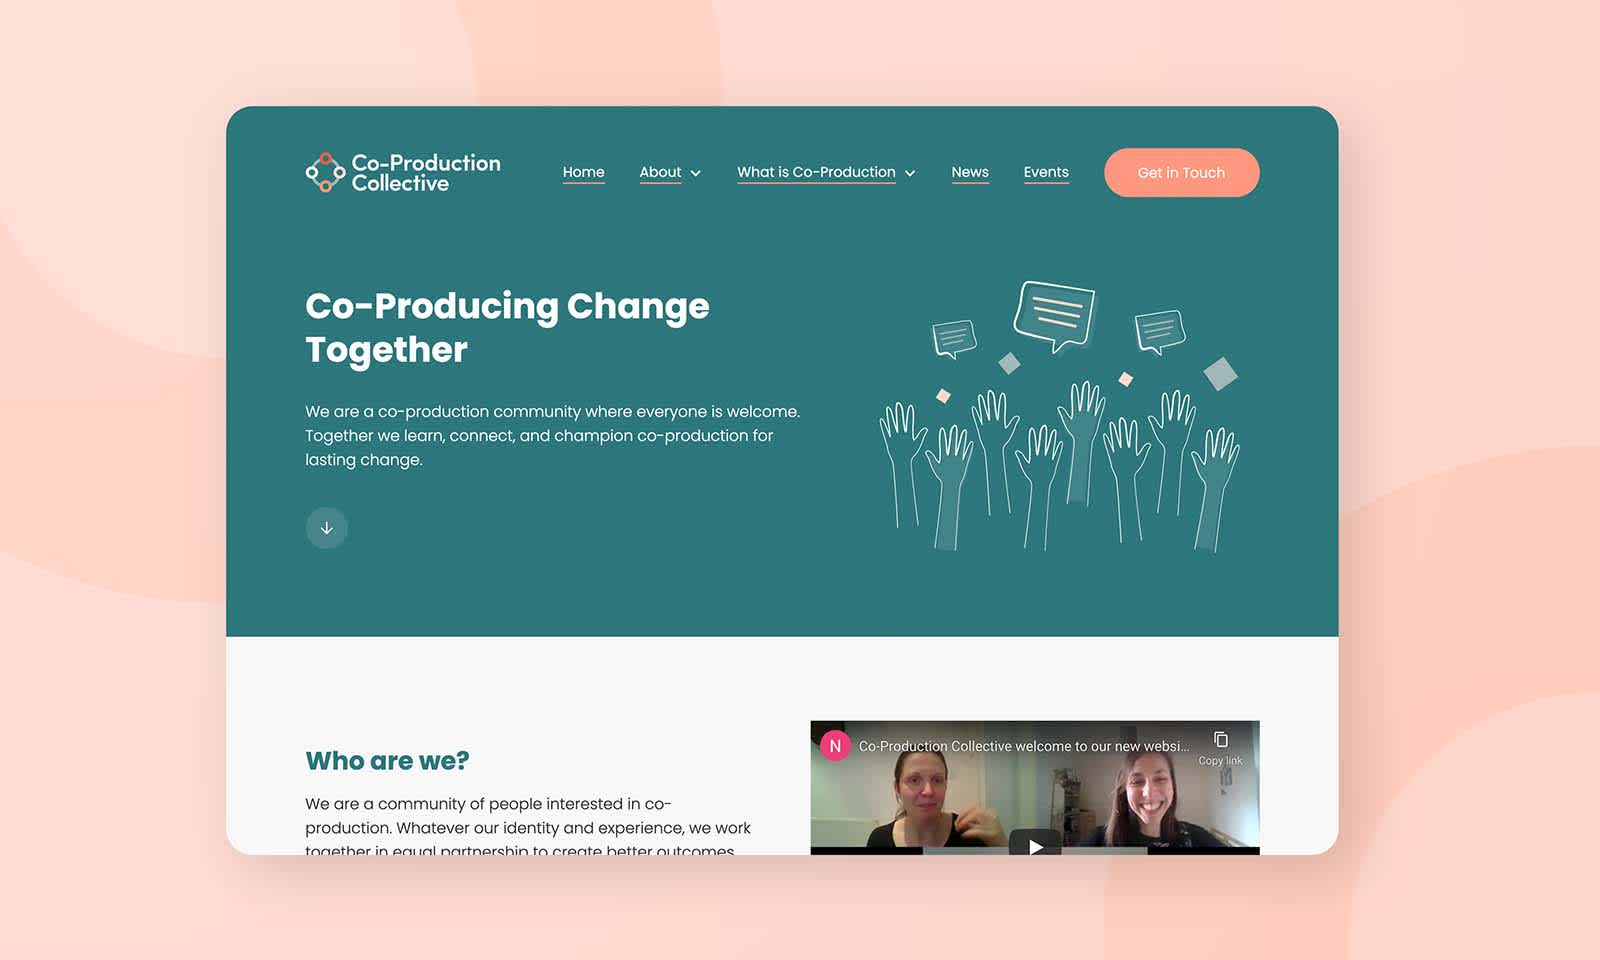 A new brand identity and website for the co-production movement